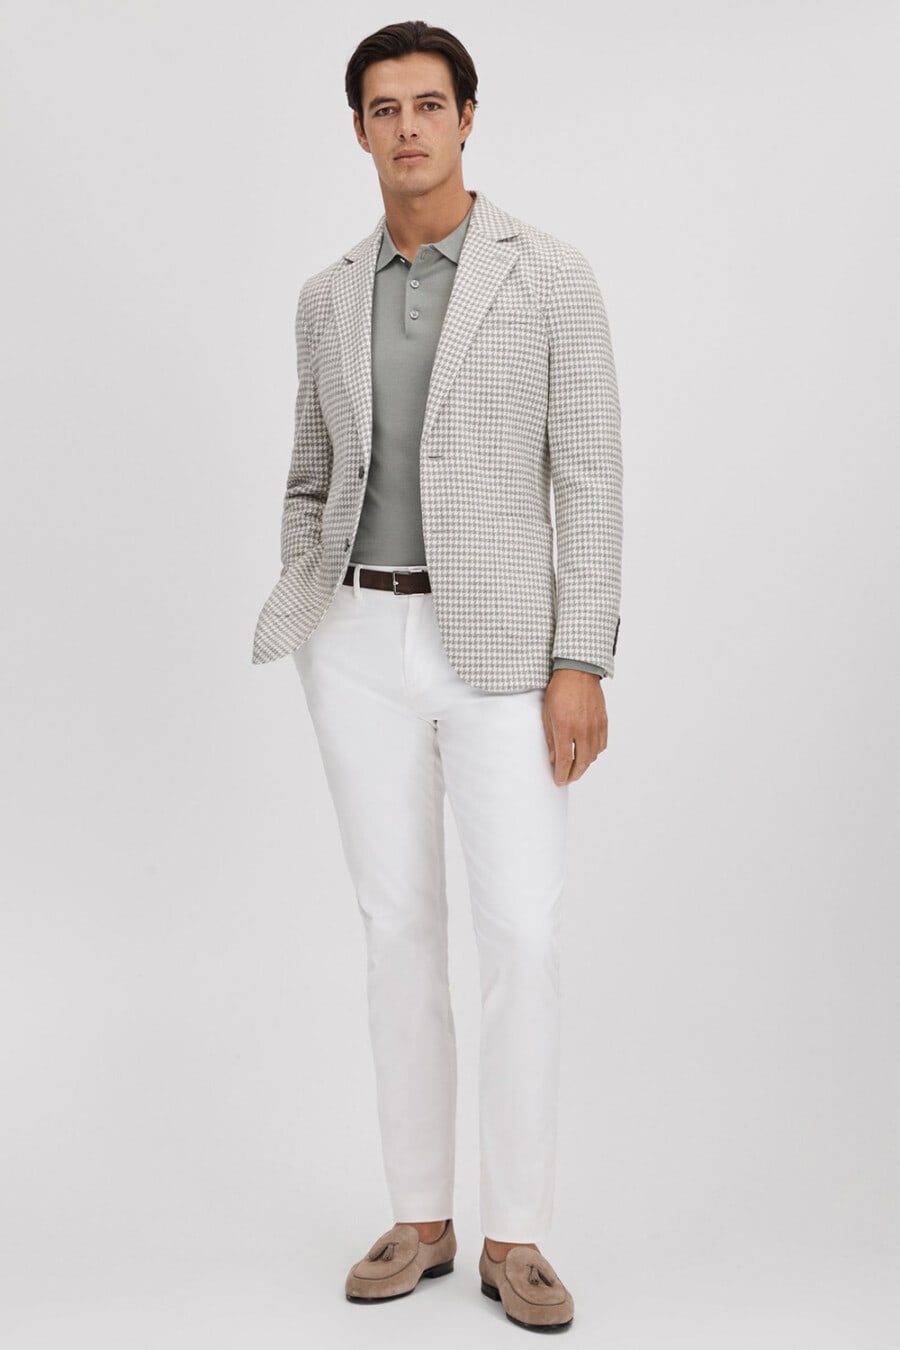 Men's white pants, grey tucked in polo shirt, white/grey check blazer and taupe suede tassel loafers smart-casual outfit